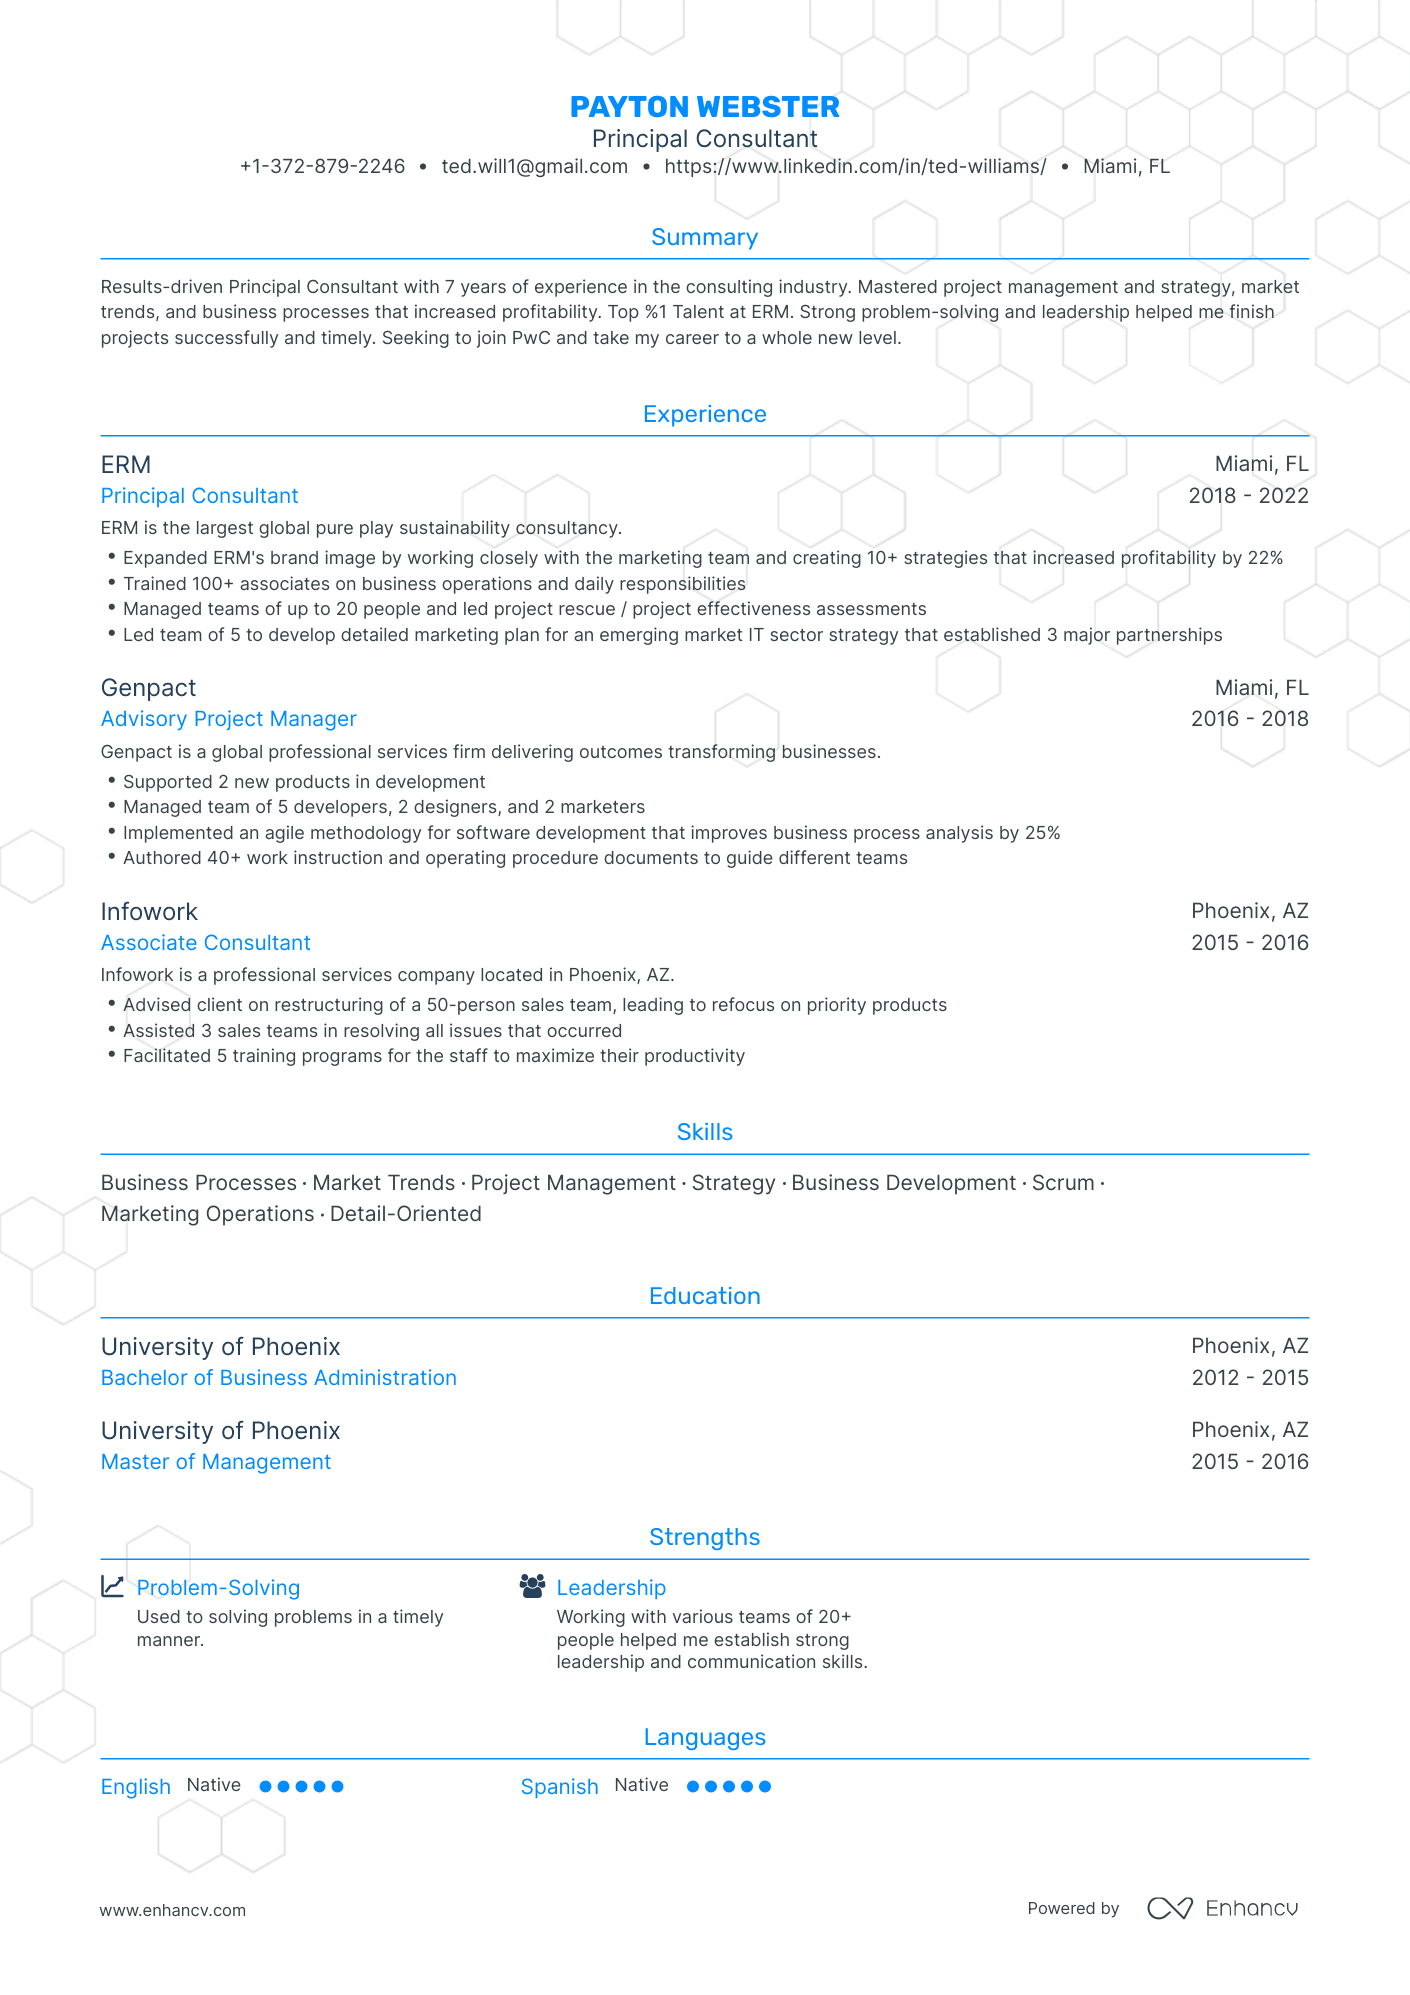 Traditional PwC Resume Template